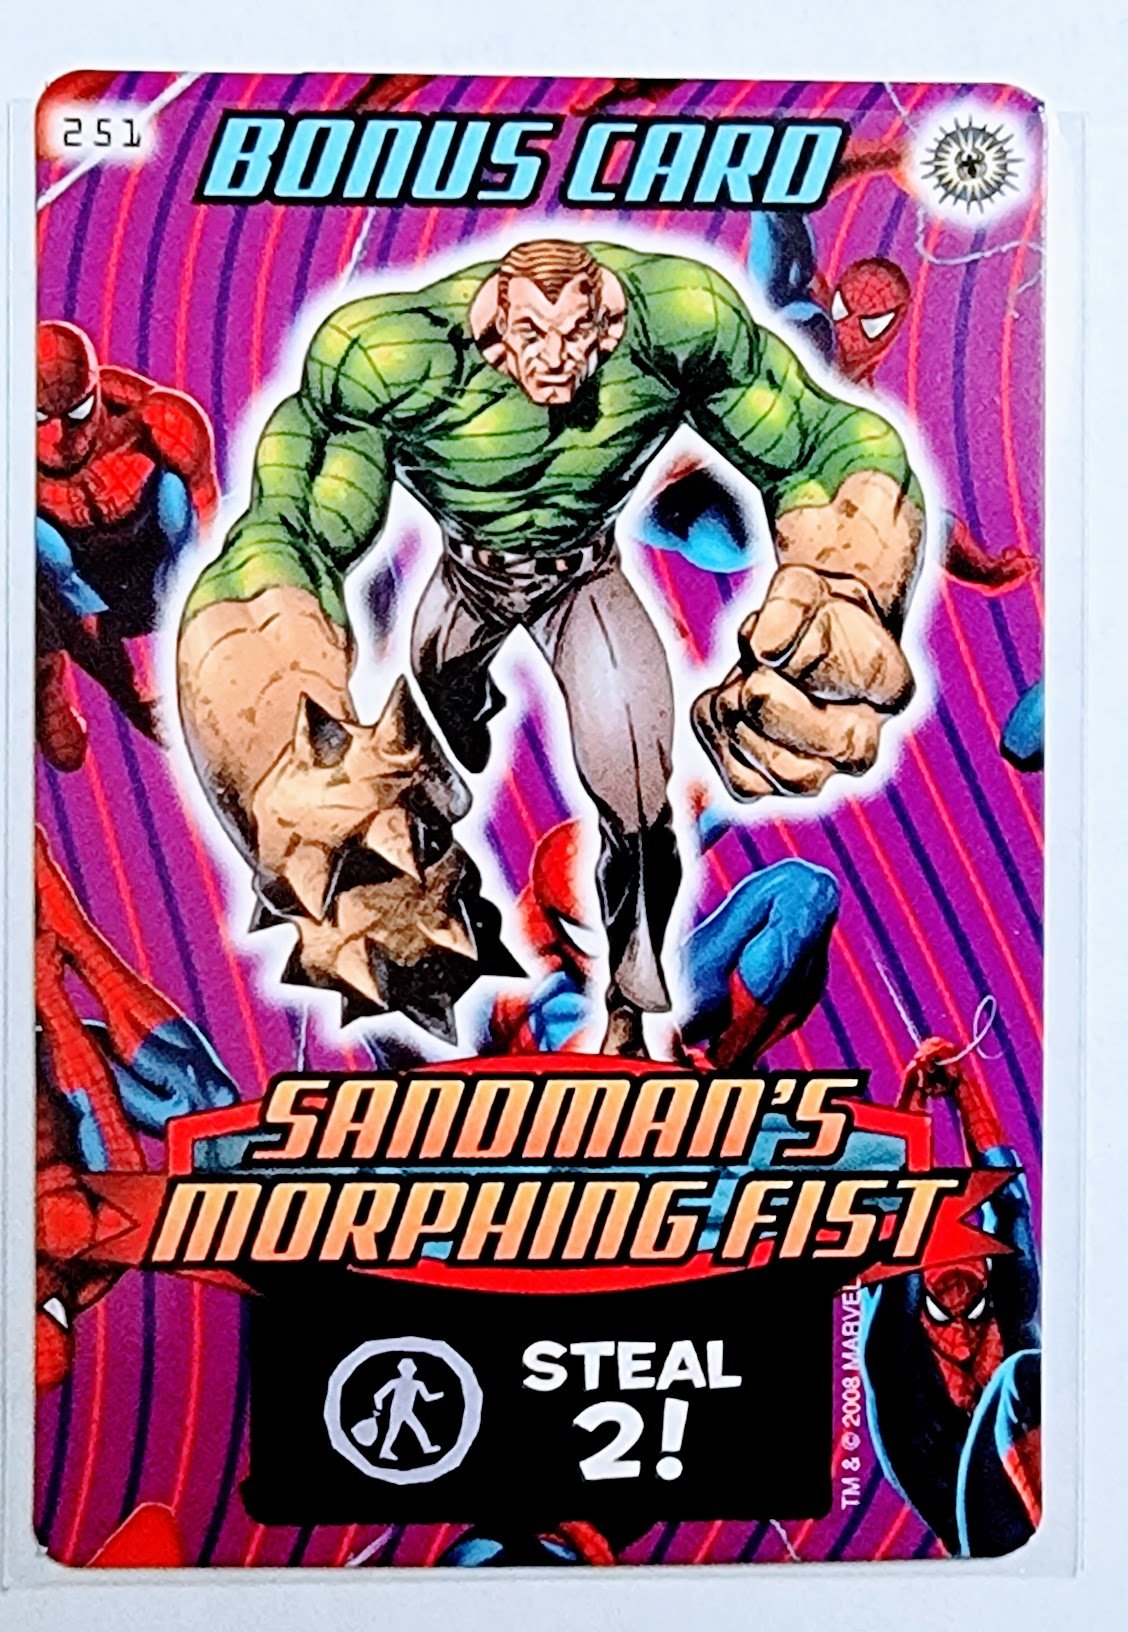 2008 Spiderman Heroes and Villains Sandman's Morphing Fist Bonus Card #251 Marvel Booster Trading Card UPTI simple Xclusive Collectibles   